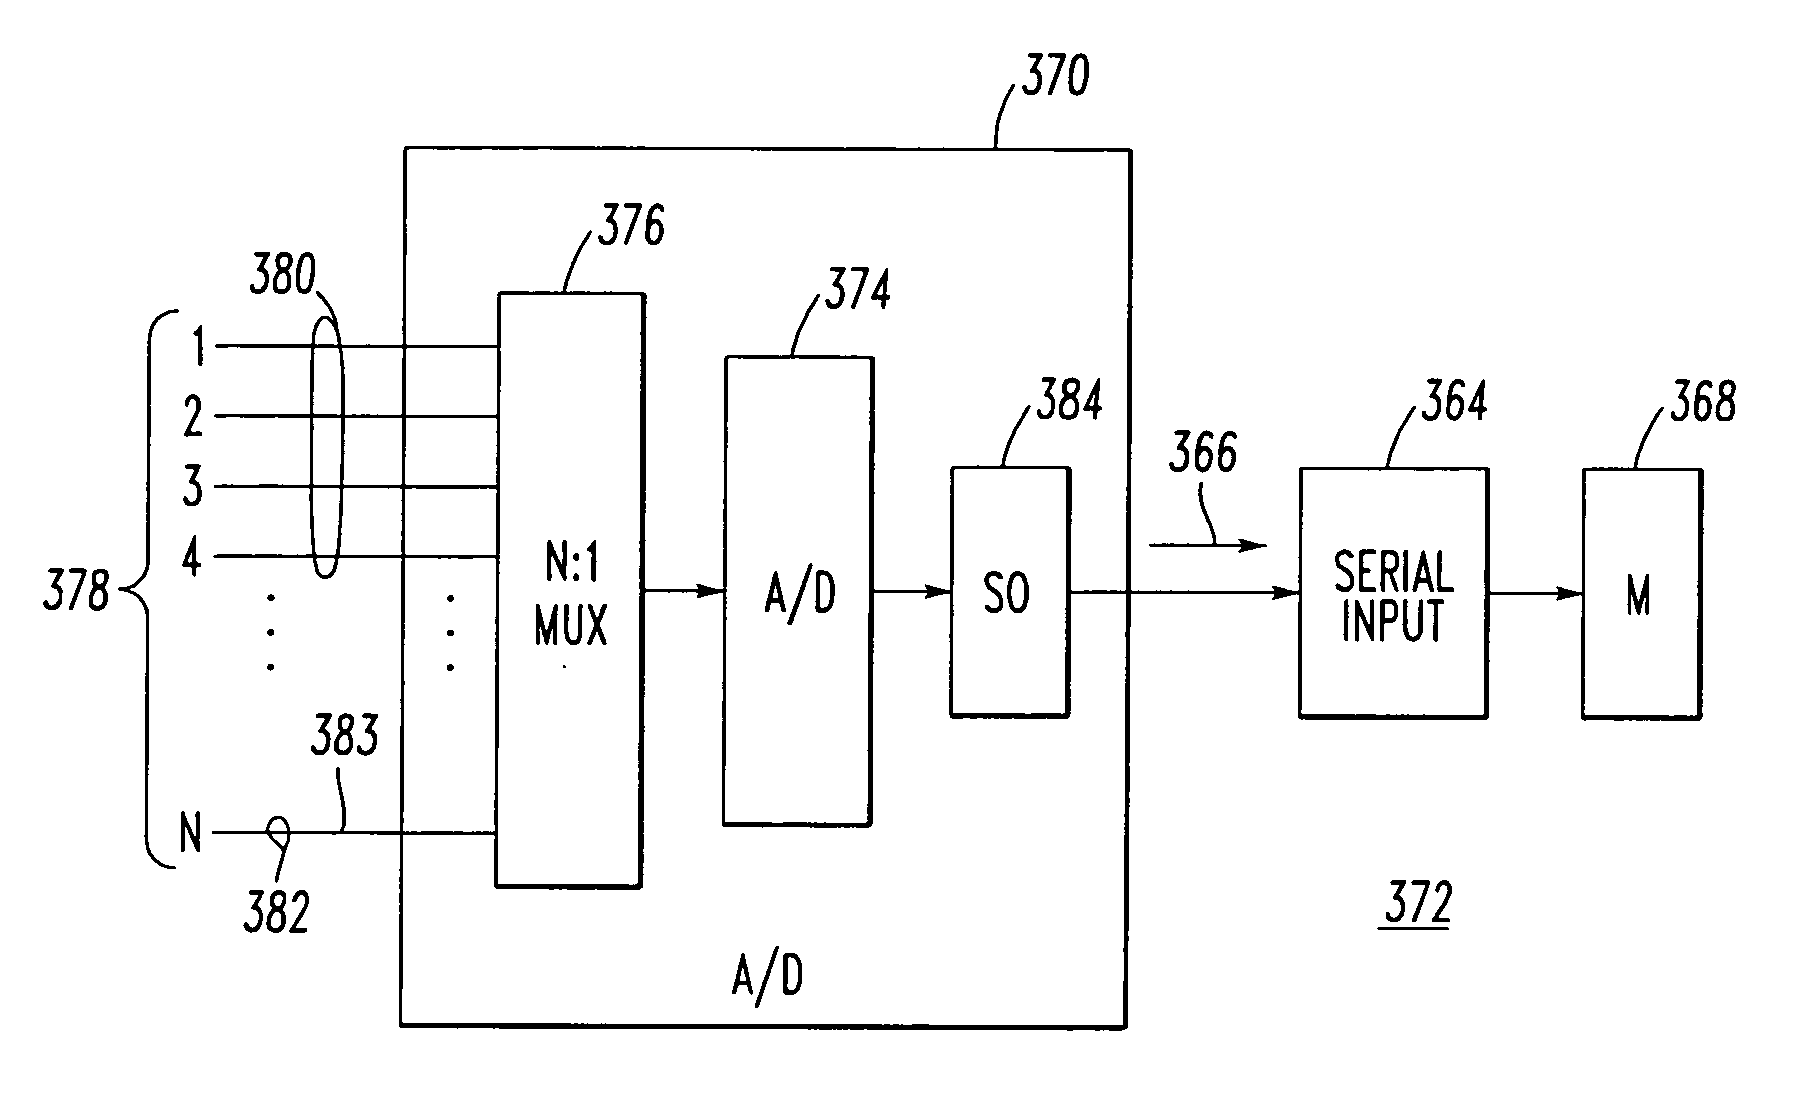 Plural channel analog-to-digital converter, method and meter employing an input channel with a predetermined direct current bias